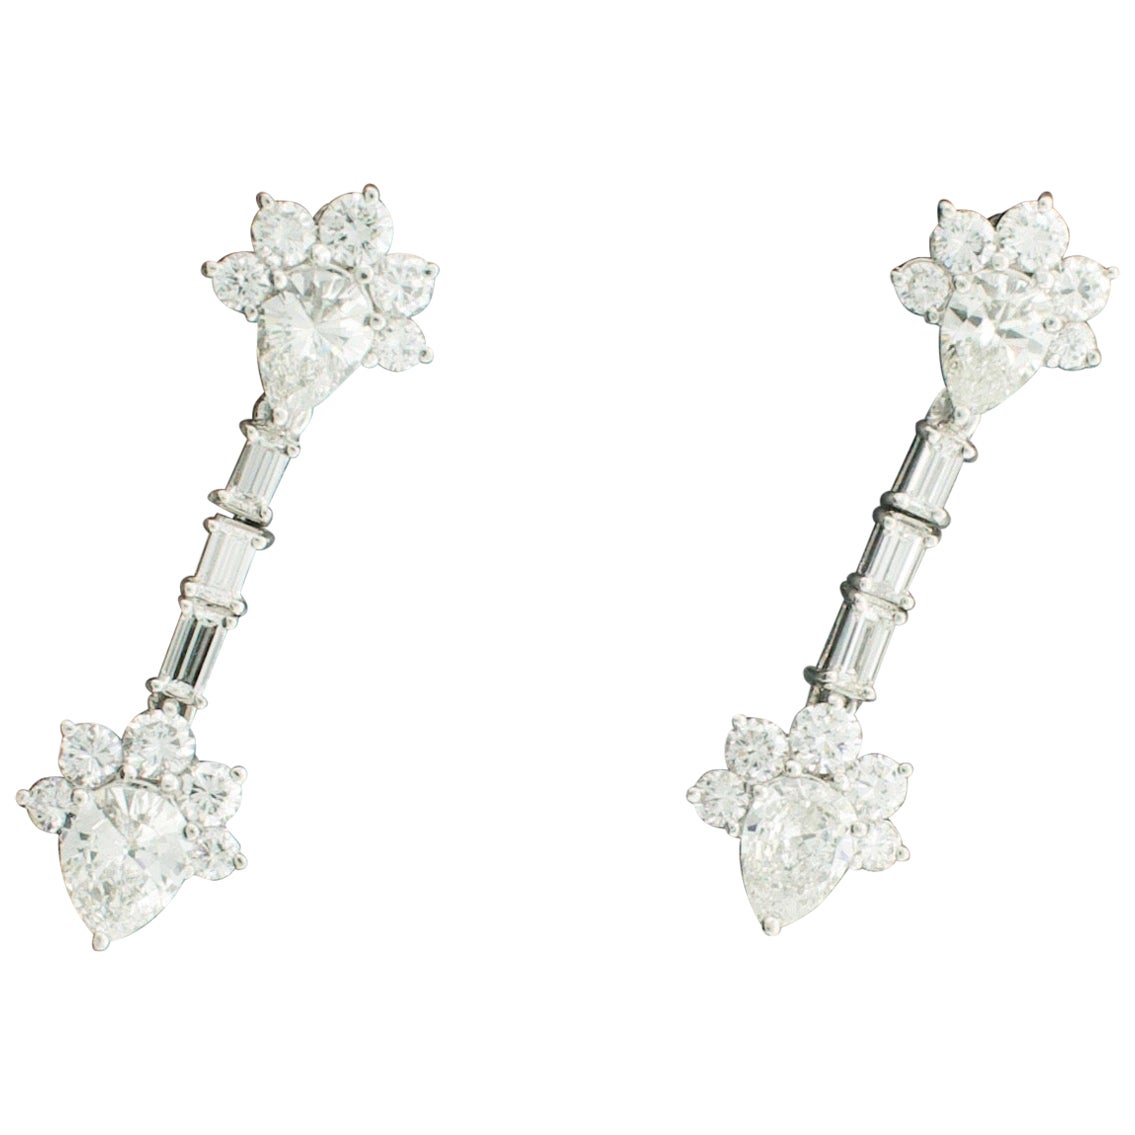 Dangling Diamond Platinum Earrings Circa 1950's 4.20 cts. Total Weight For Sale